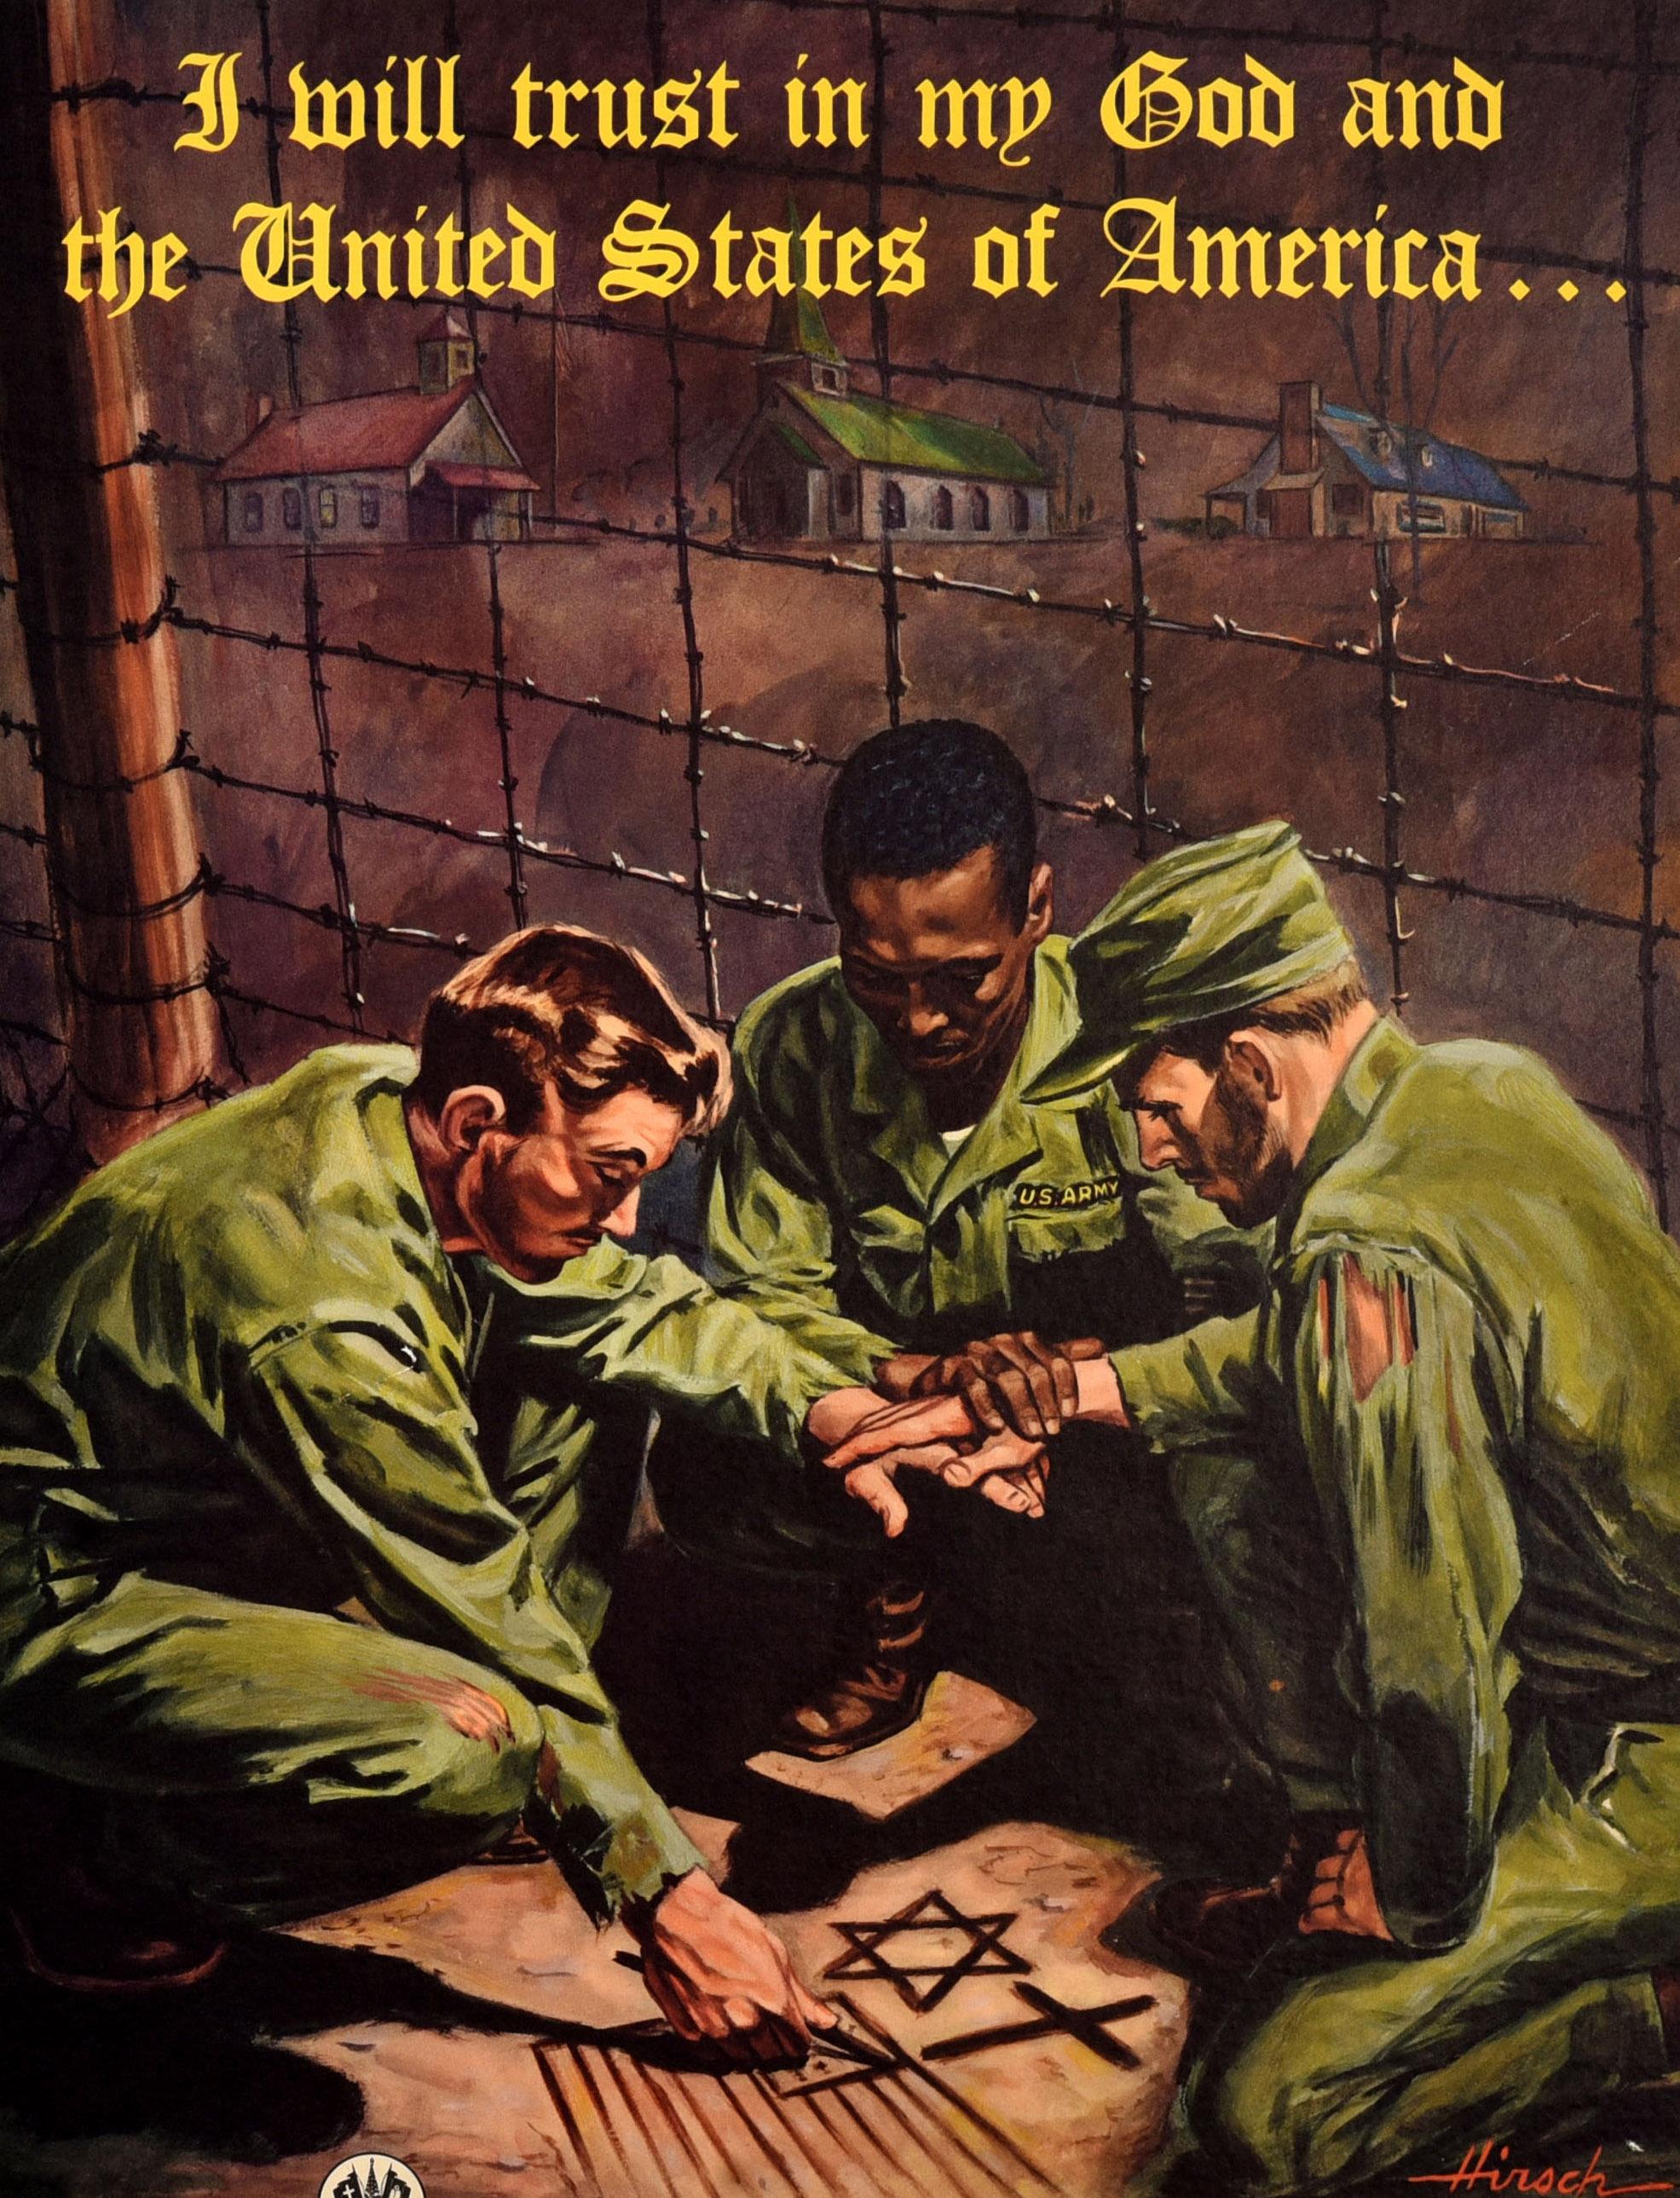 Scarce original vintage military propaganda poster - I will trust in my God and the United States of America ... I owe this to God Home Country - featuring artwork depicting three US Army soldiers in tattered uniform crouching on the ground in front